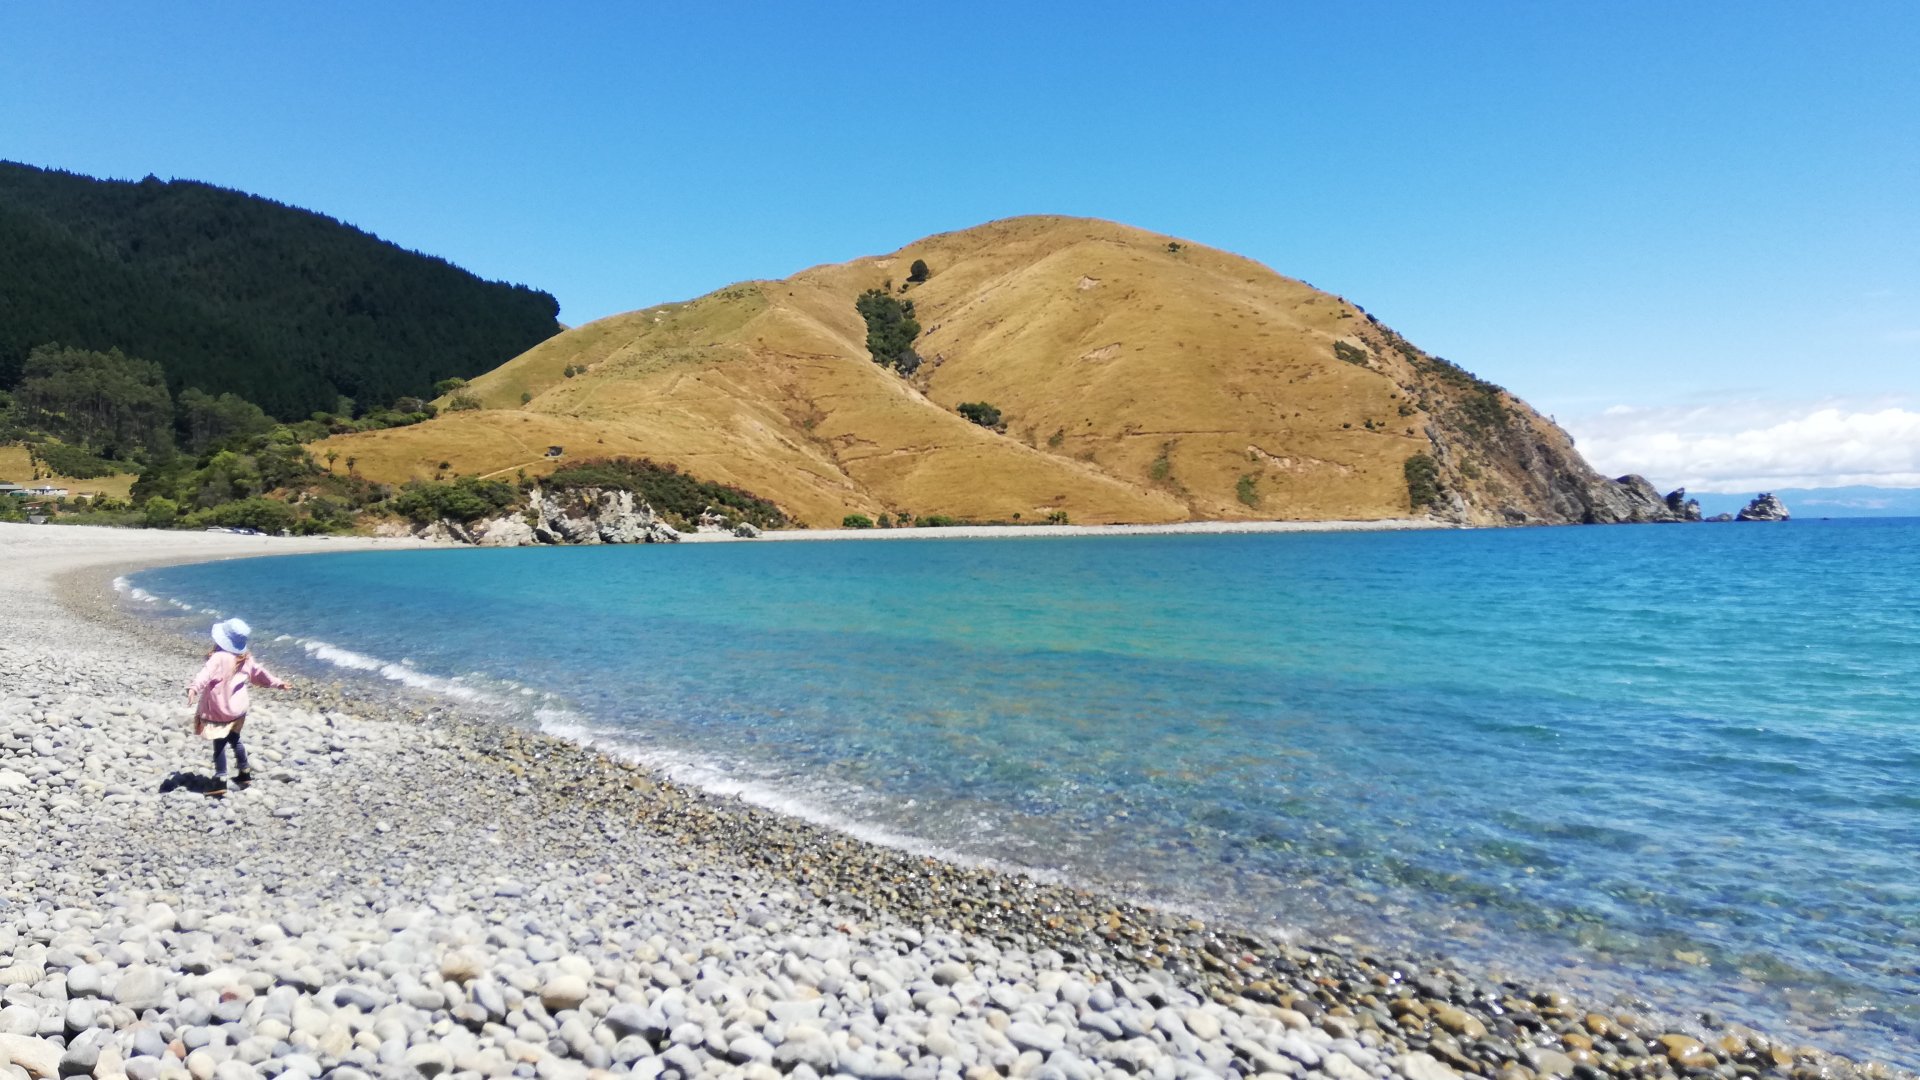 Brittany Packer's photo of Cable Bay was a randomly selected winner of Nelson City Council's social media competition.